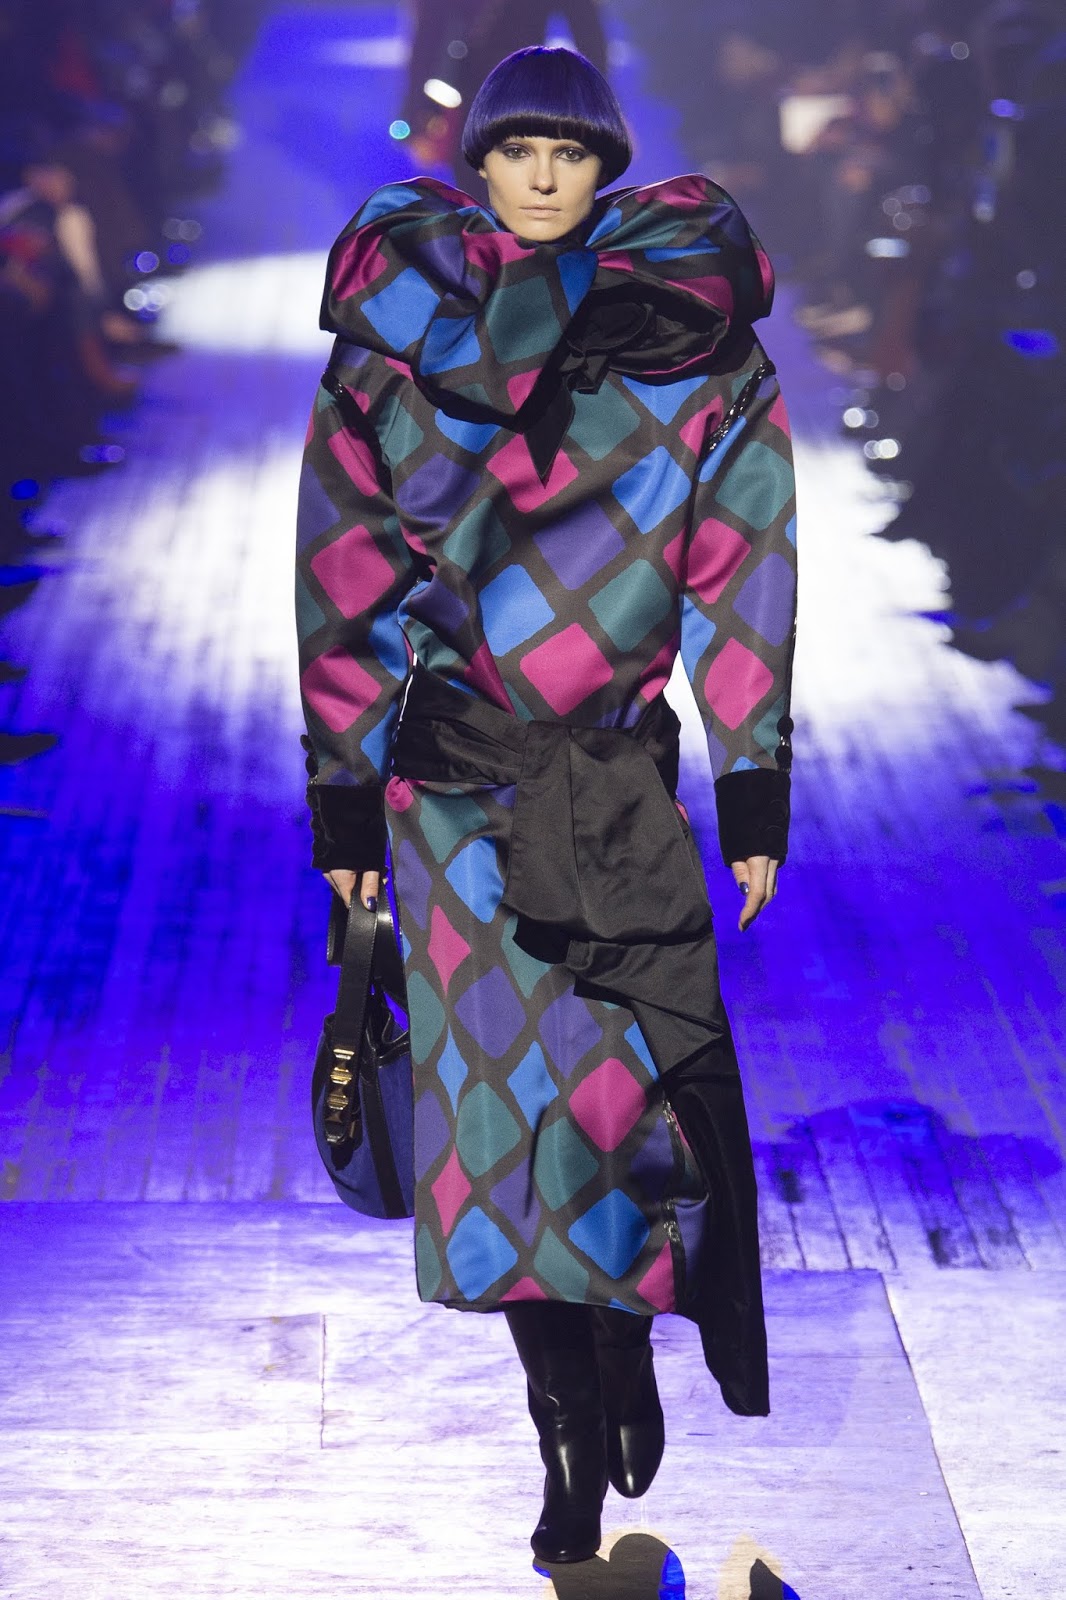 On the Runway: MARC JACOBS June 6, 2018 | ZsaZsa Bellagio - Like No Other